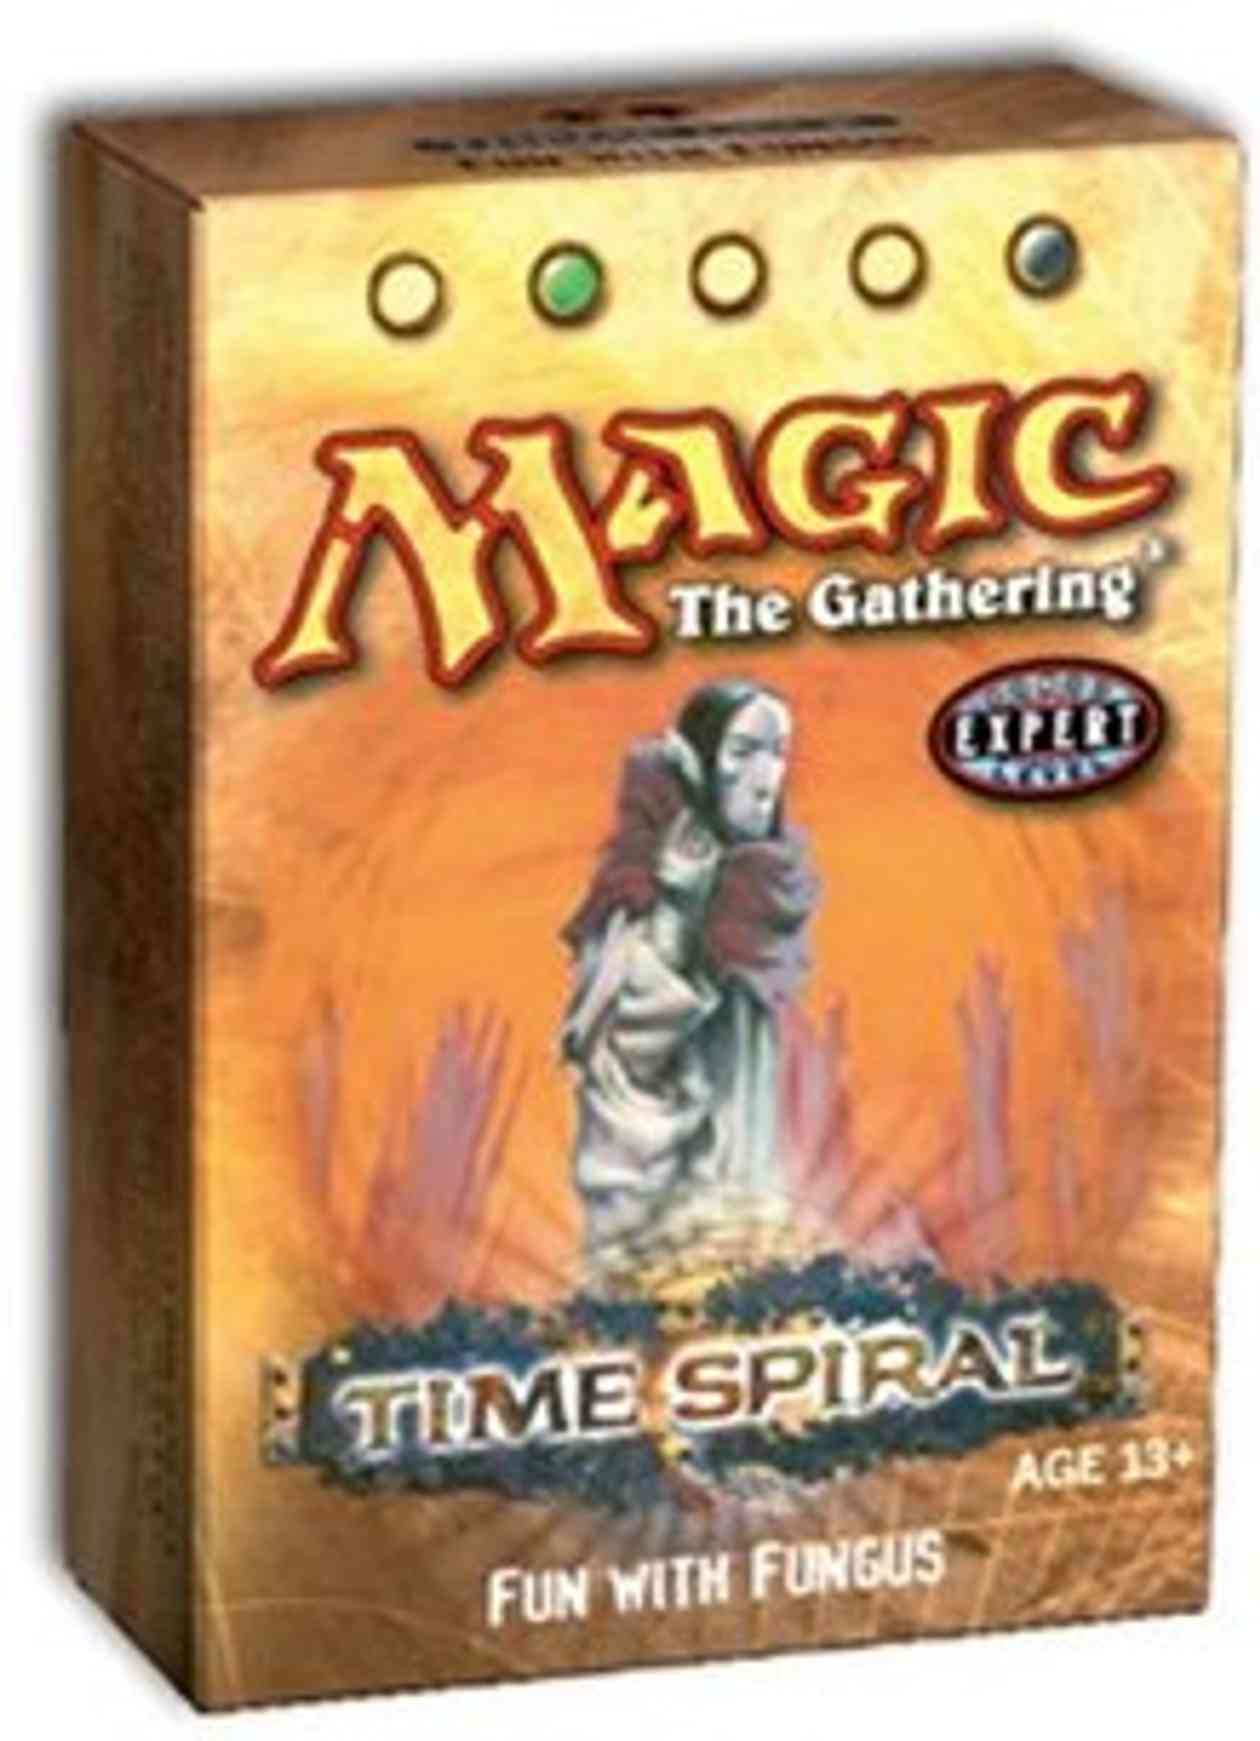 Time Spiral Theme Deck - Fun With Fungus magic card front